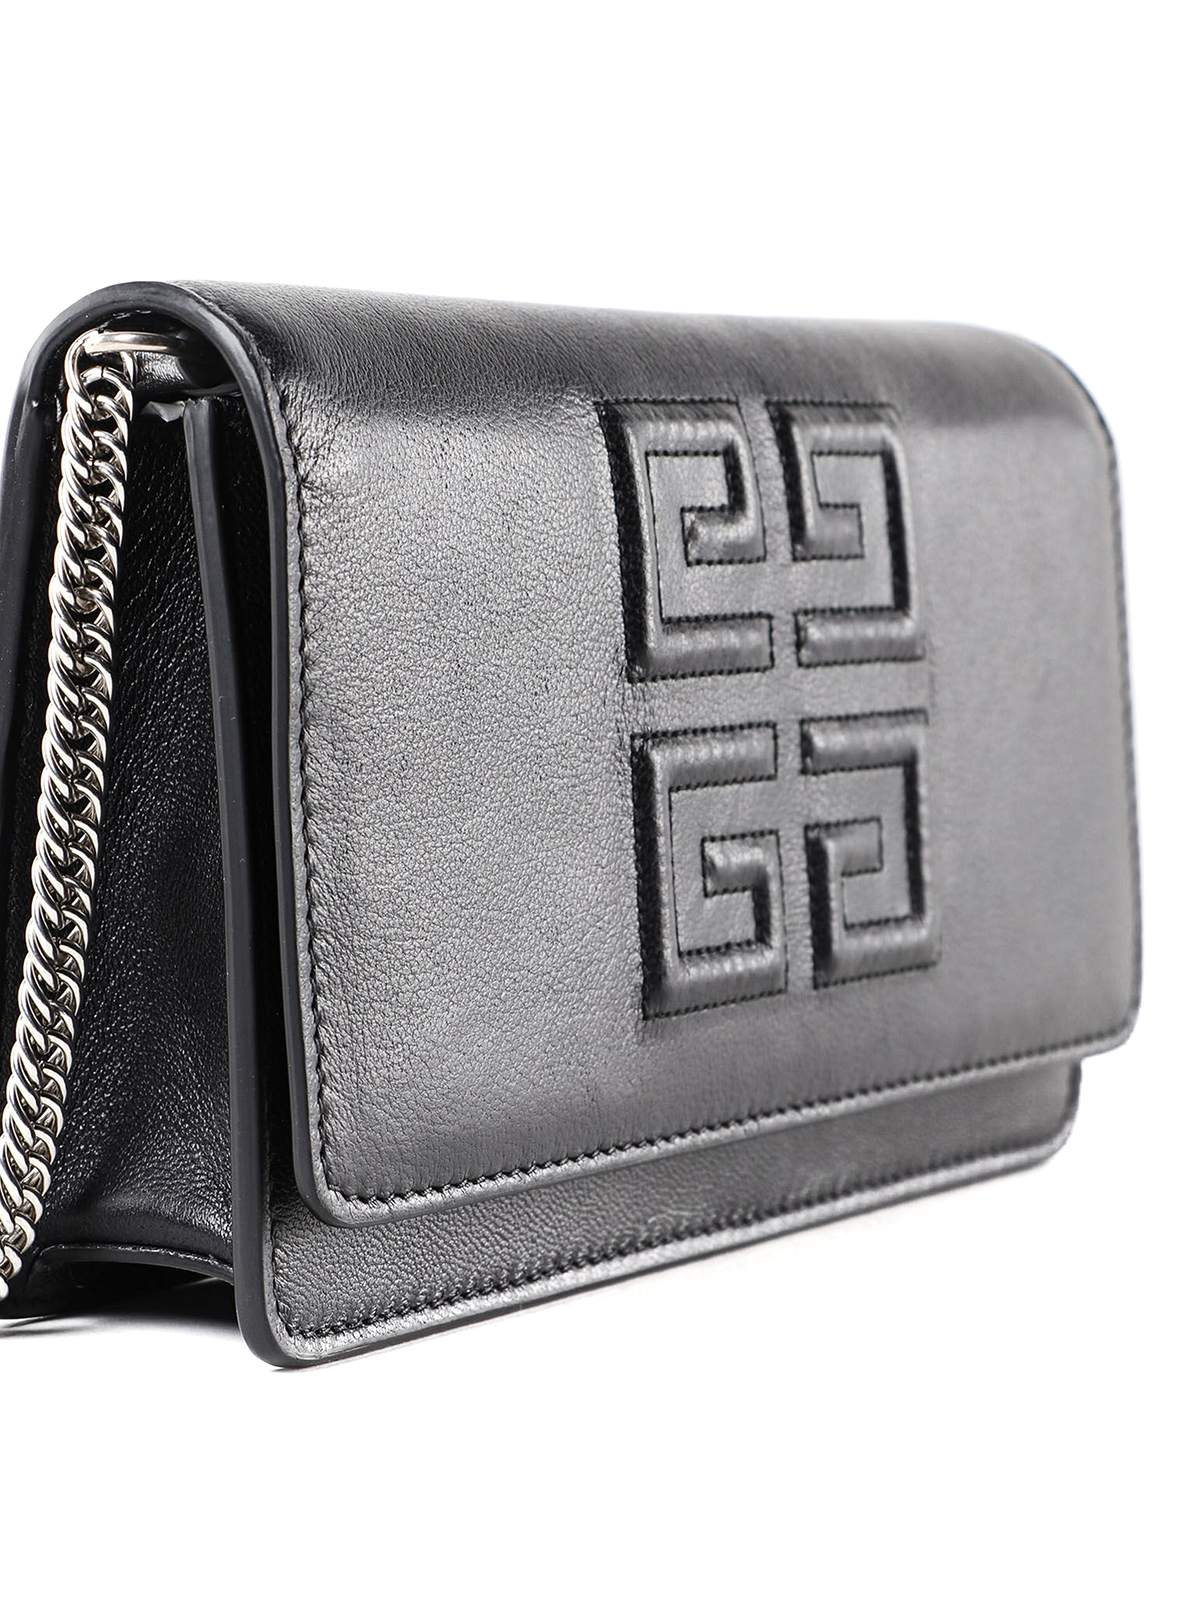 givenchy emblem leather wallet on chain